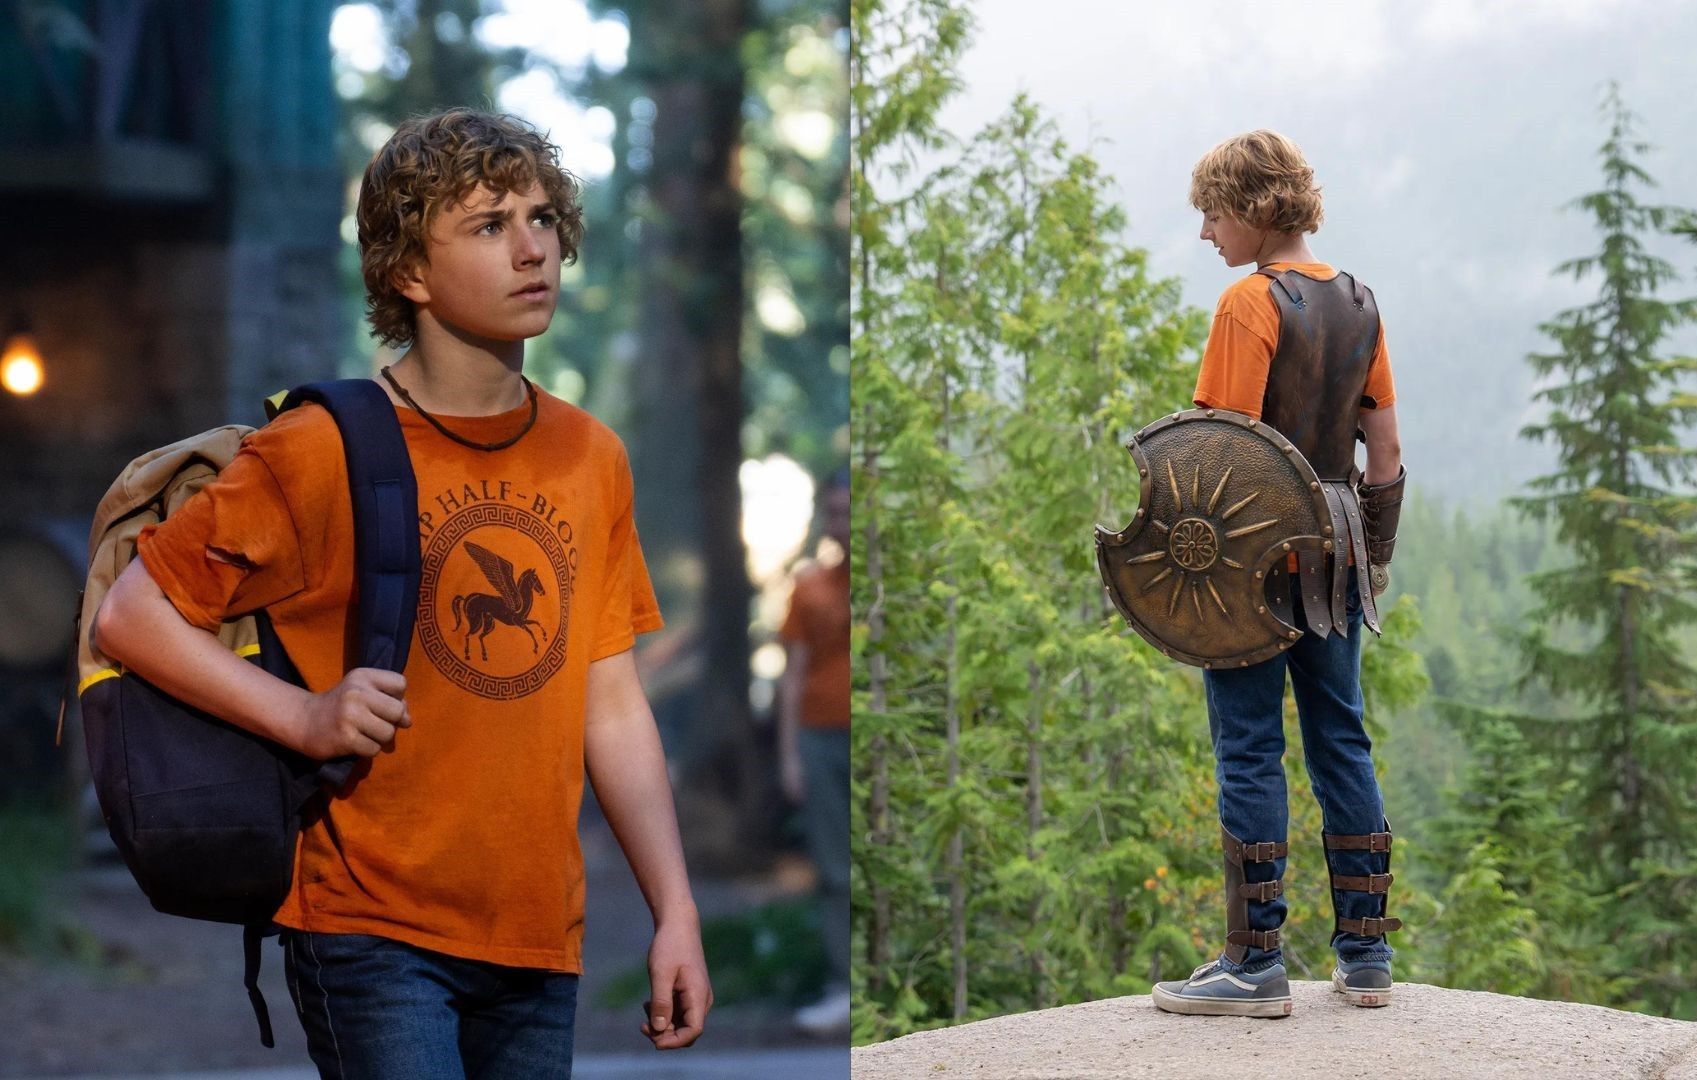 Camp Half-Blood seen in new ‘Percy Jackson and the Olympians’ teaser thumbnail